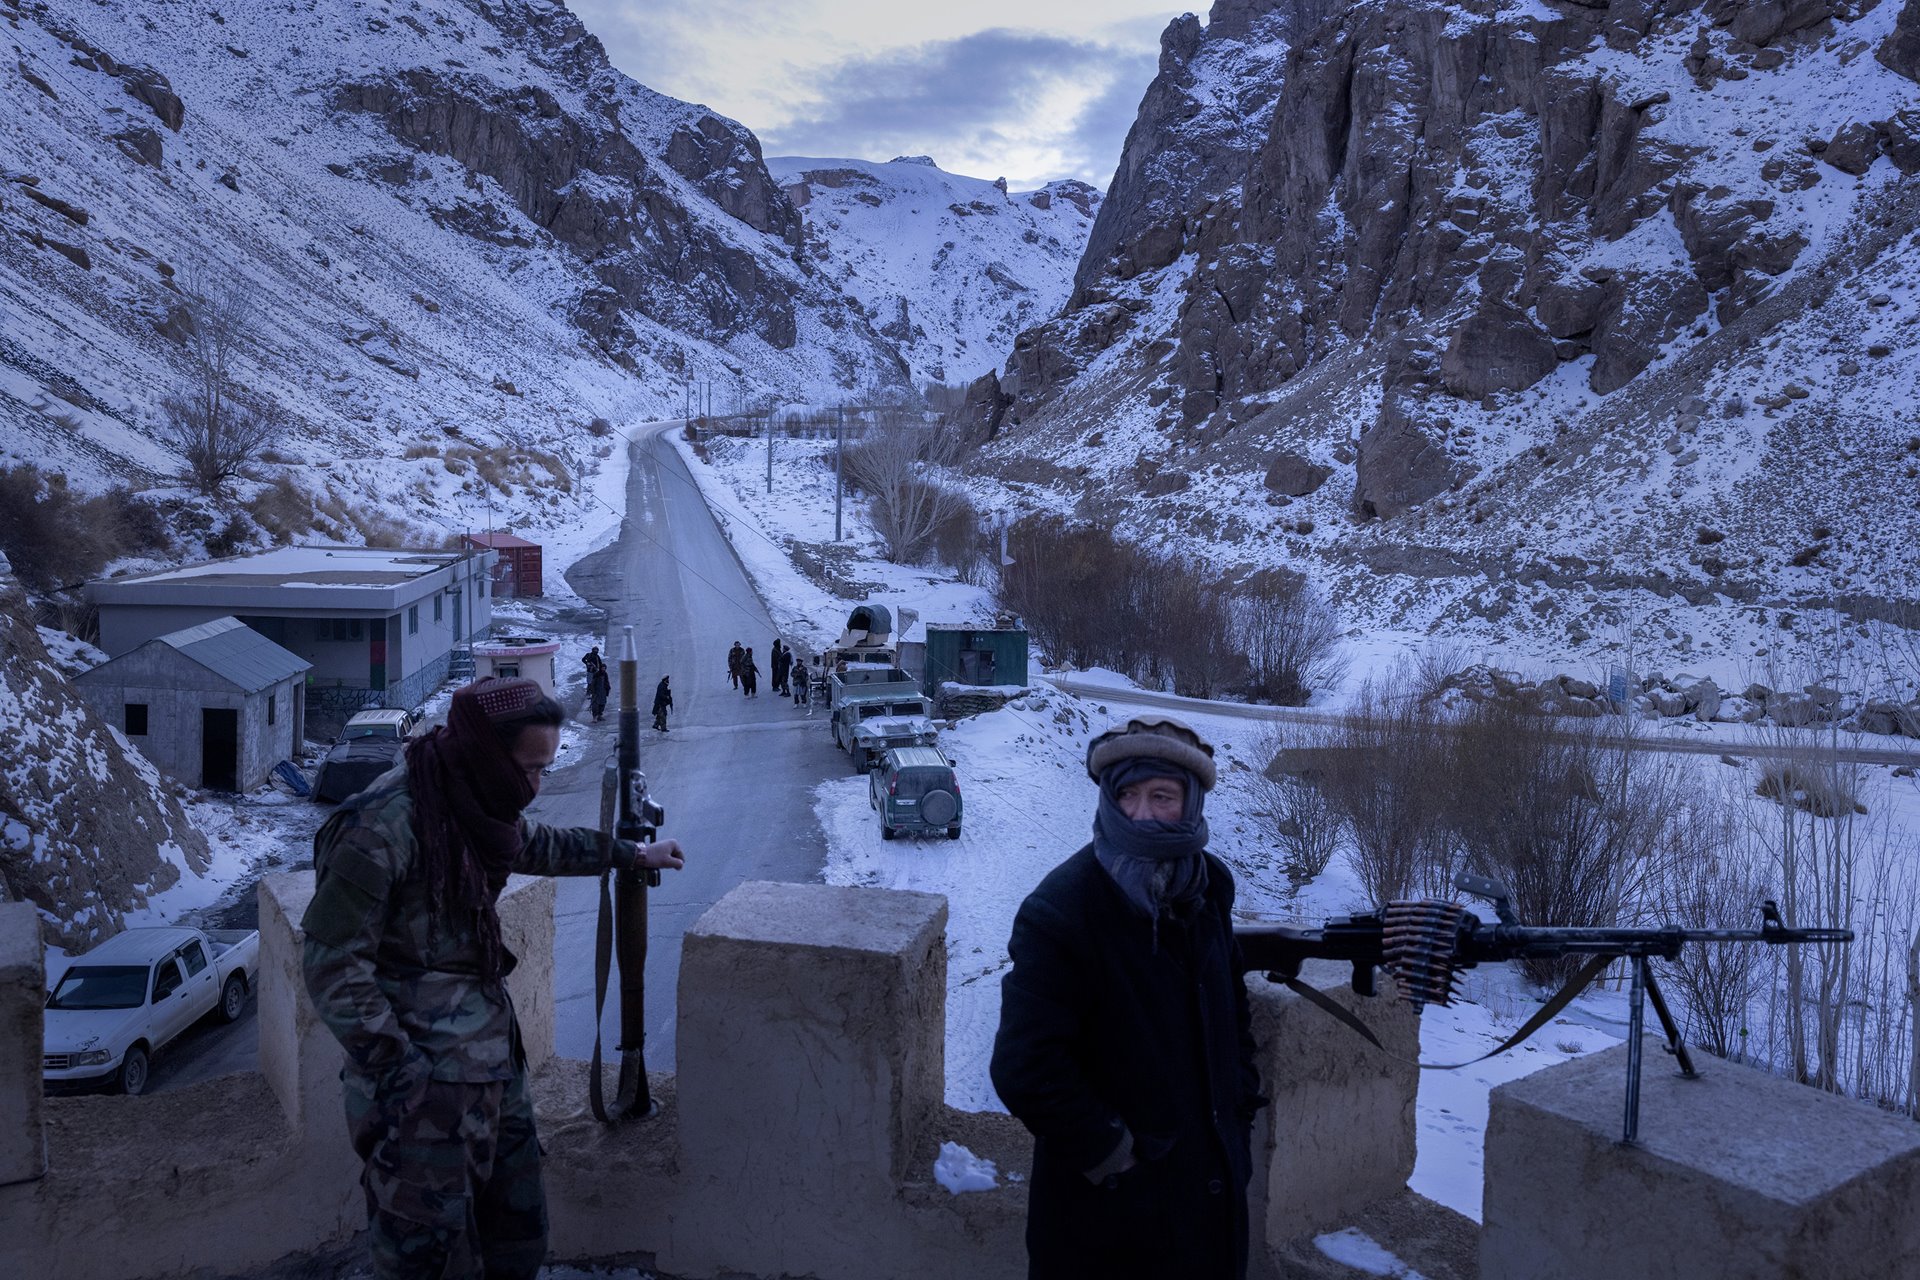 A heavily armed Taliban checkpoint outside Bamiyan, Afghanistan. For years, the Taliban waged guerilla warfare against foreign troops and the Afghan army; now they must guard against attacks by the Islamic State, which is using the same tactics the Taliban deployed in an ongoing battle for control of the country.